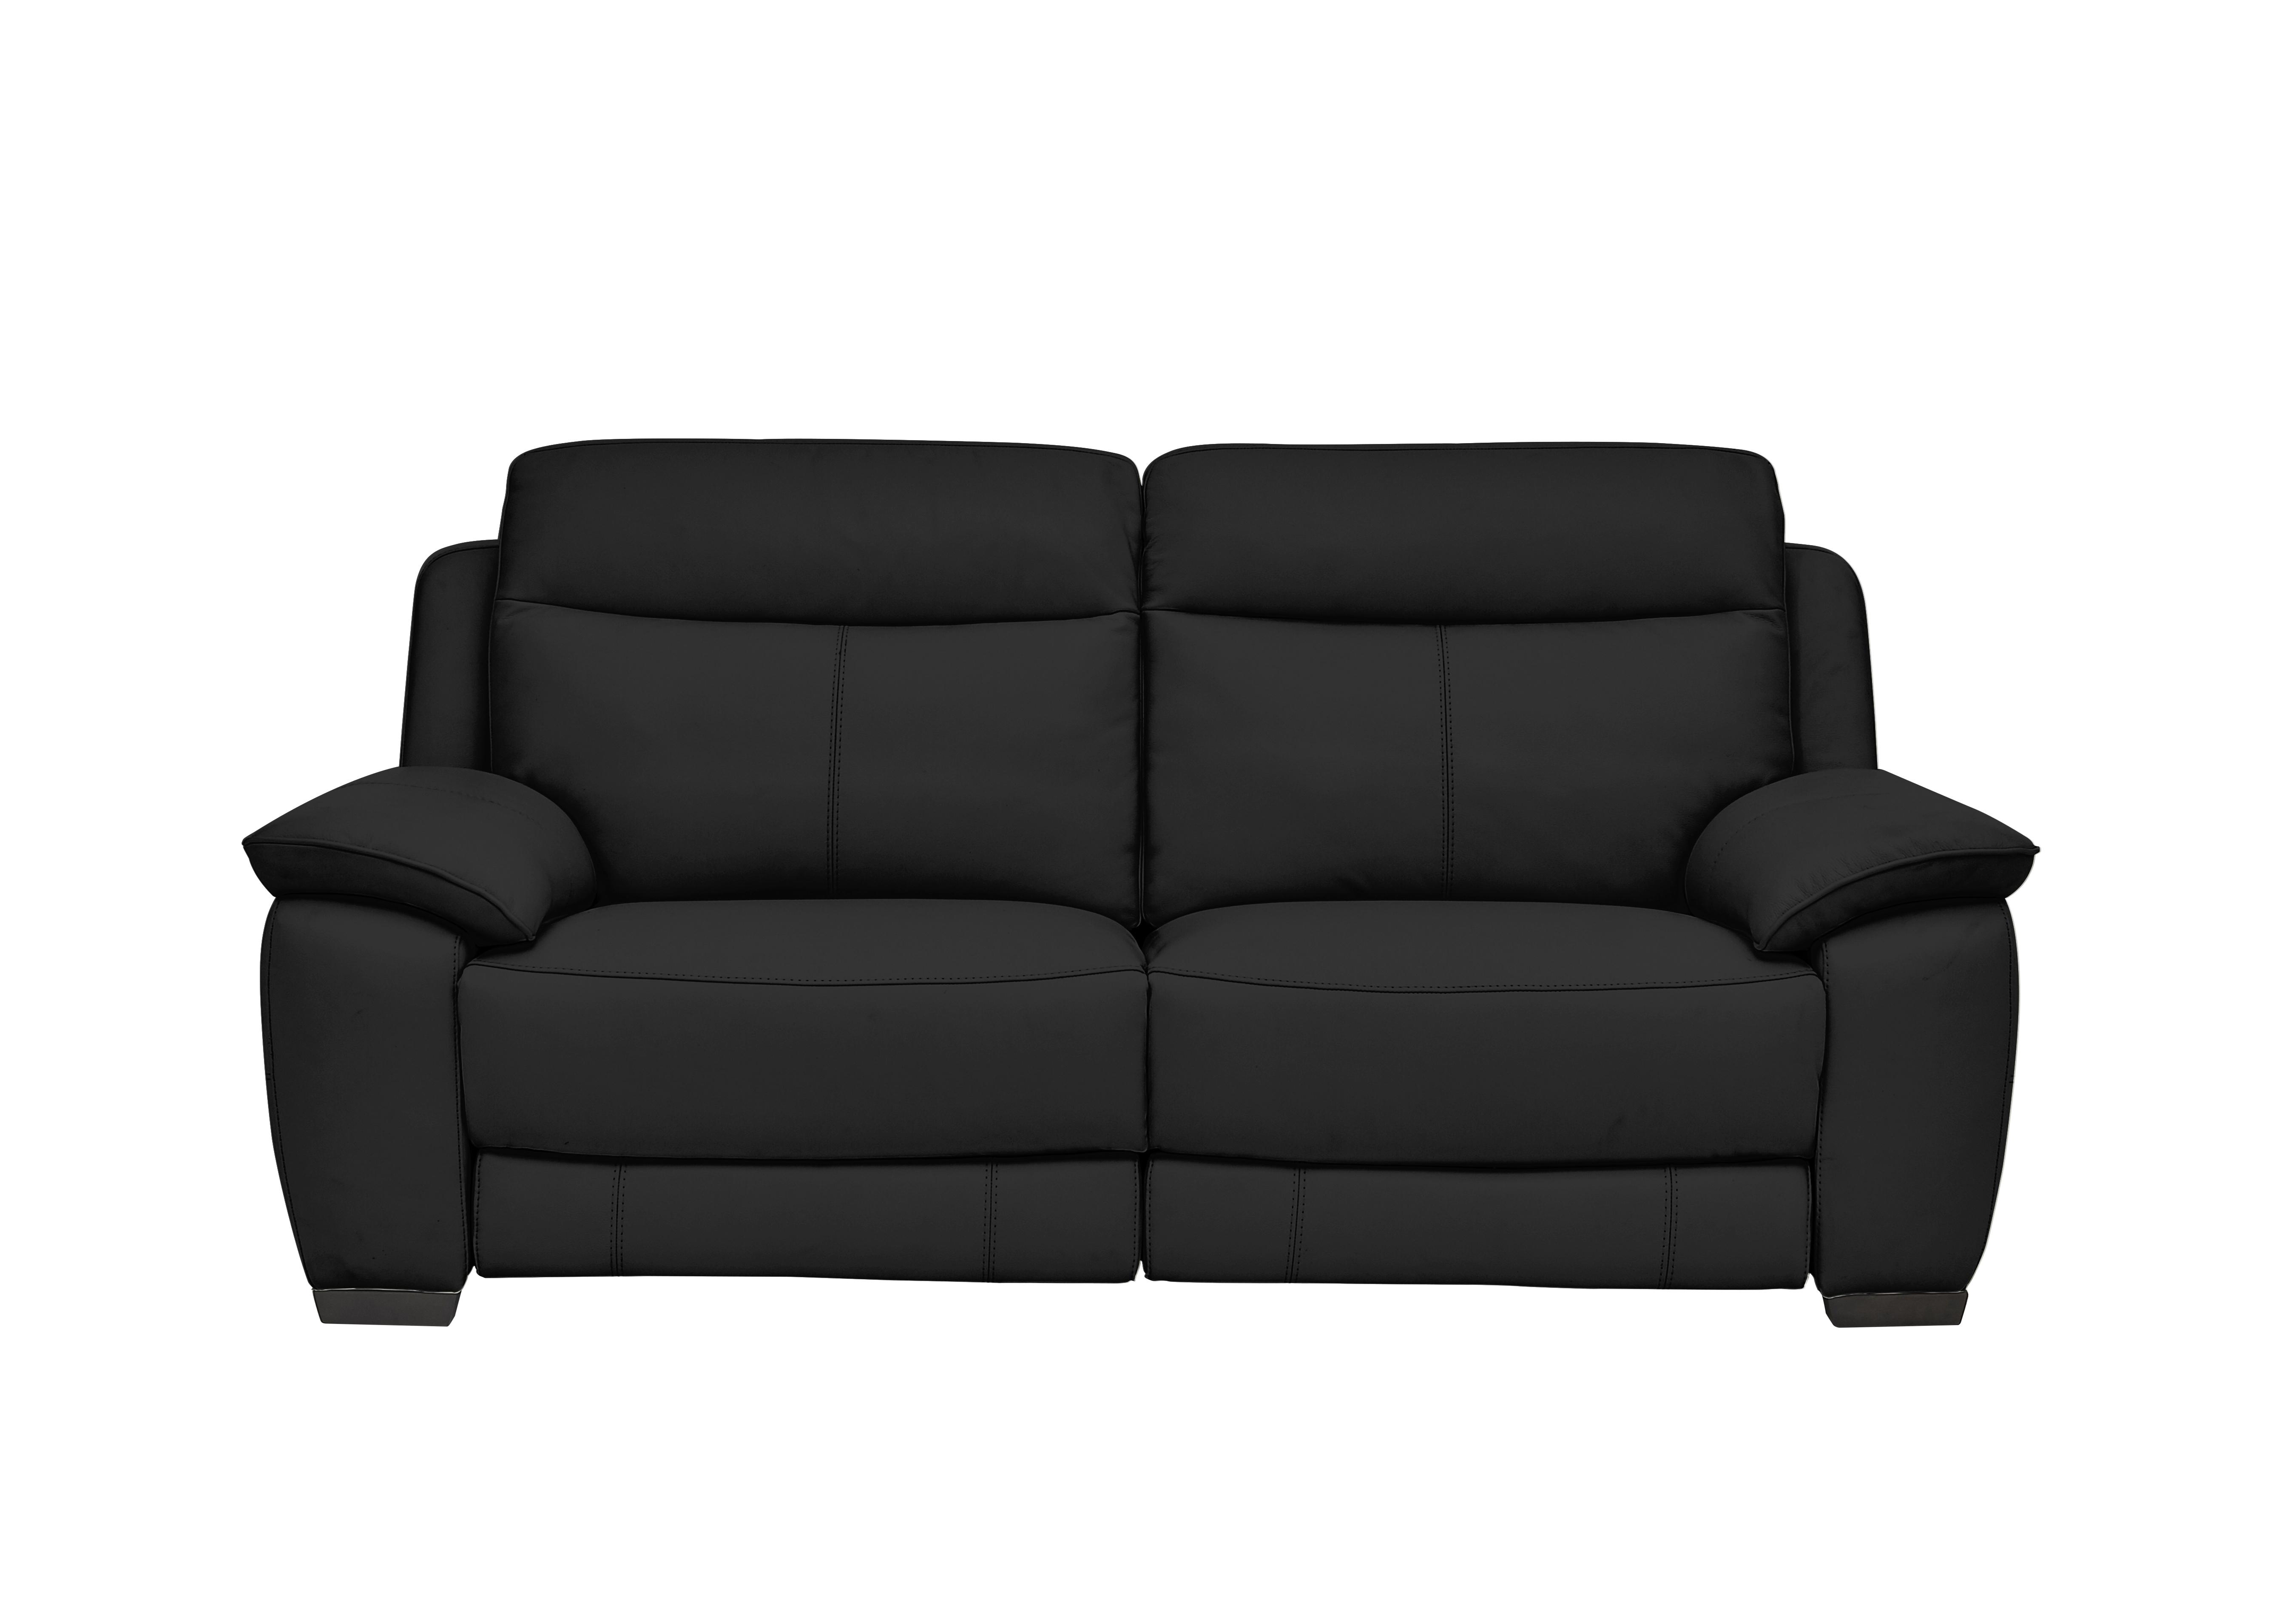 Starlight Express 3 Seater Leather Recliner Sofa with Power Headrests in Bv-3500 Classic Black on Furniture Village